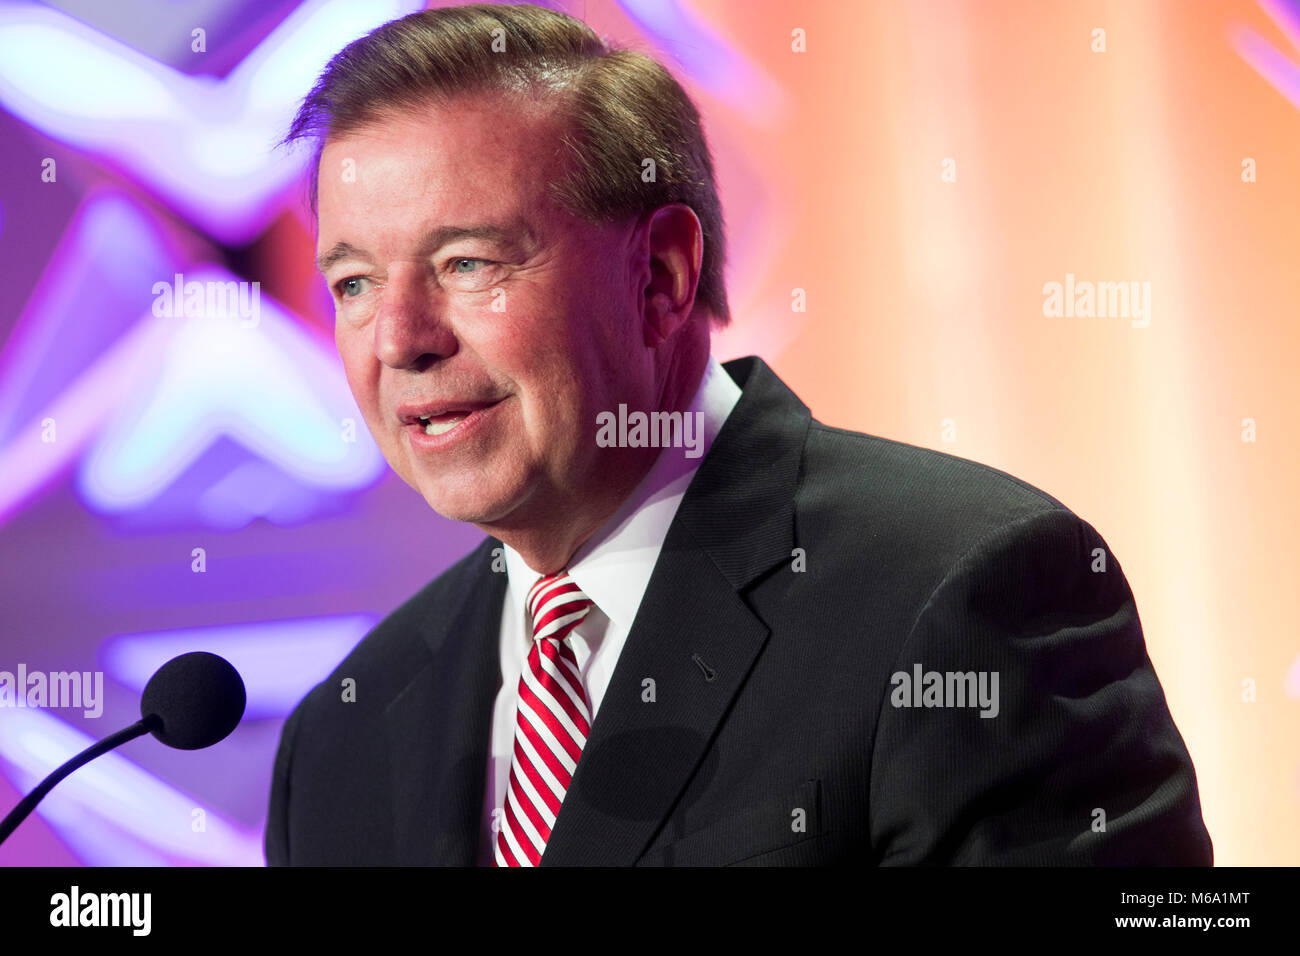 Washington, USA. 1st Mar, 2018. David J. Bronczek, President and Chief Operating Officer, FedEx Corporation, speaks at the U.S. Chamber of Commerce 17th Annual Aviation Summit in Washington, D.C. on March 1, 2018. Credit: Kristoffer Tripplaar/Alamy Live News Stock Photo